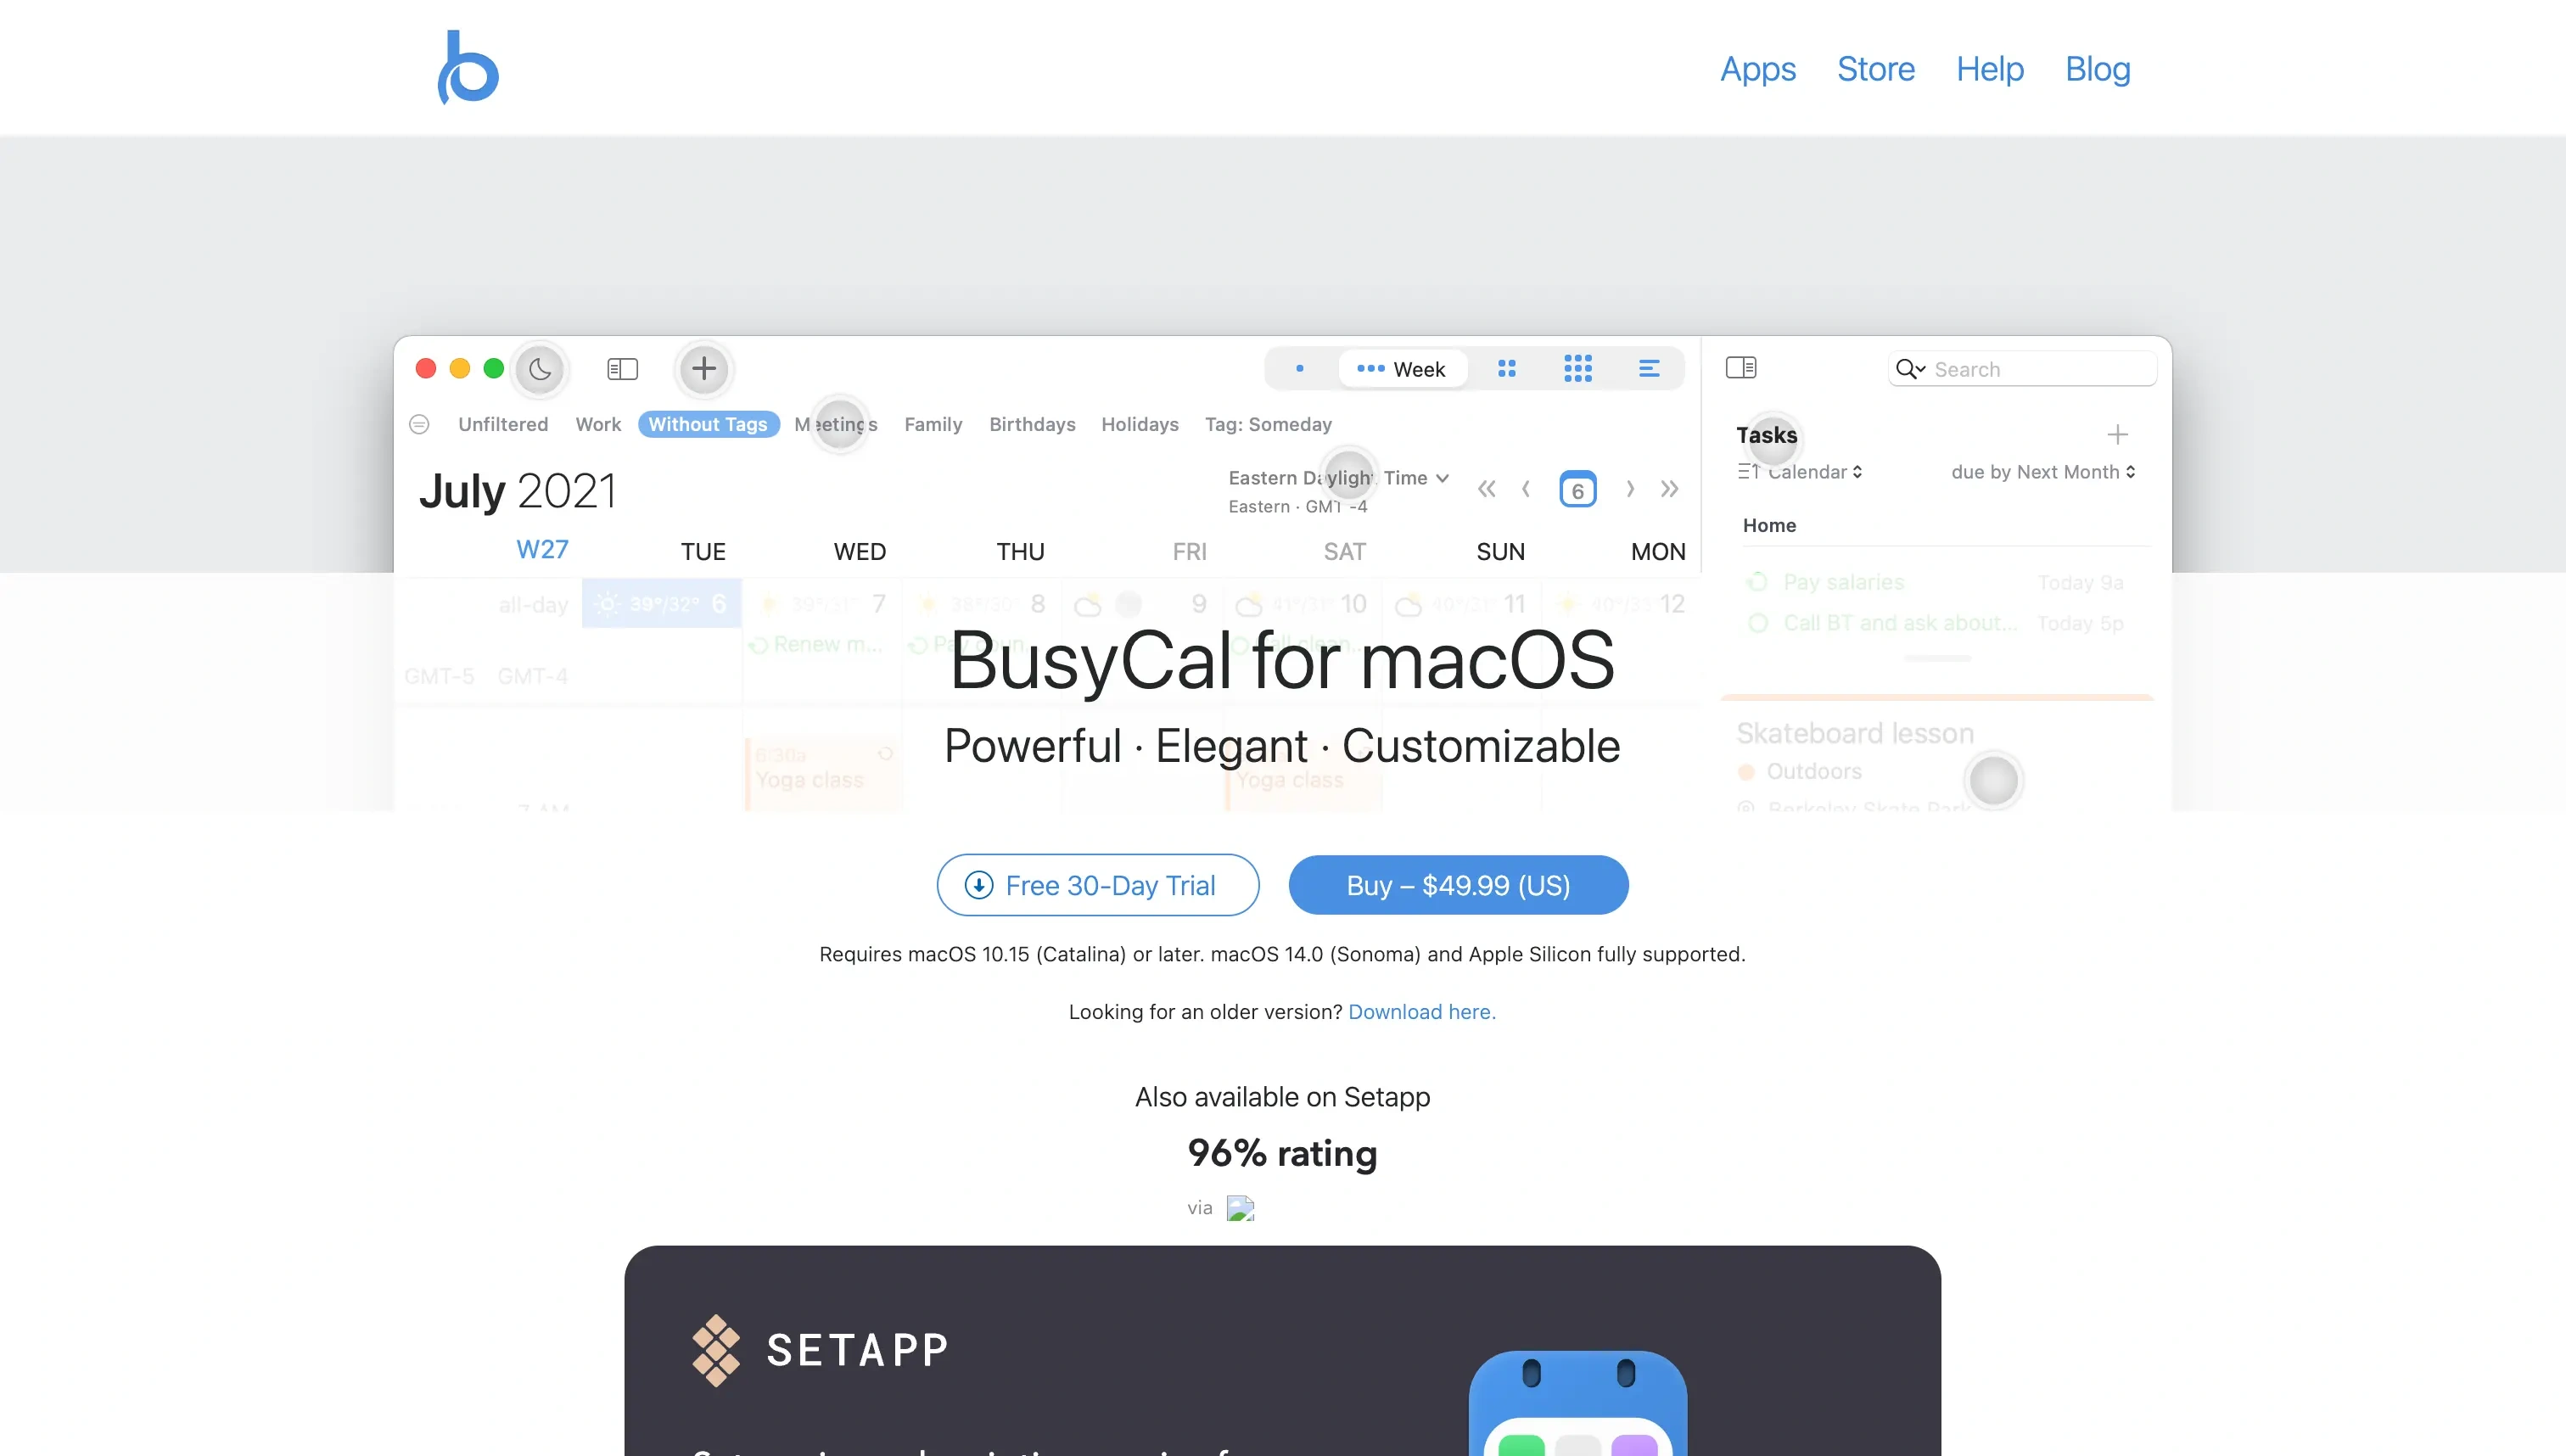 The BusyCal Landing Page